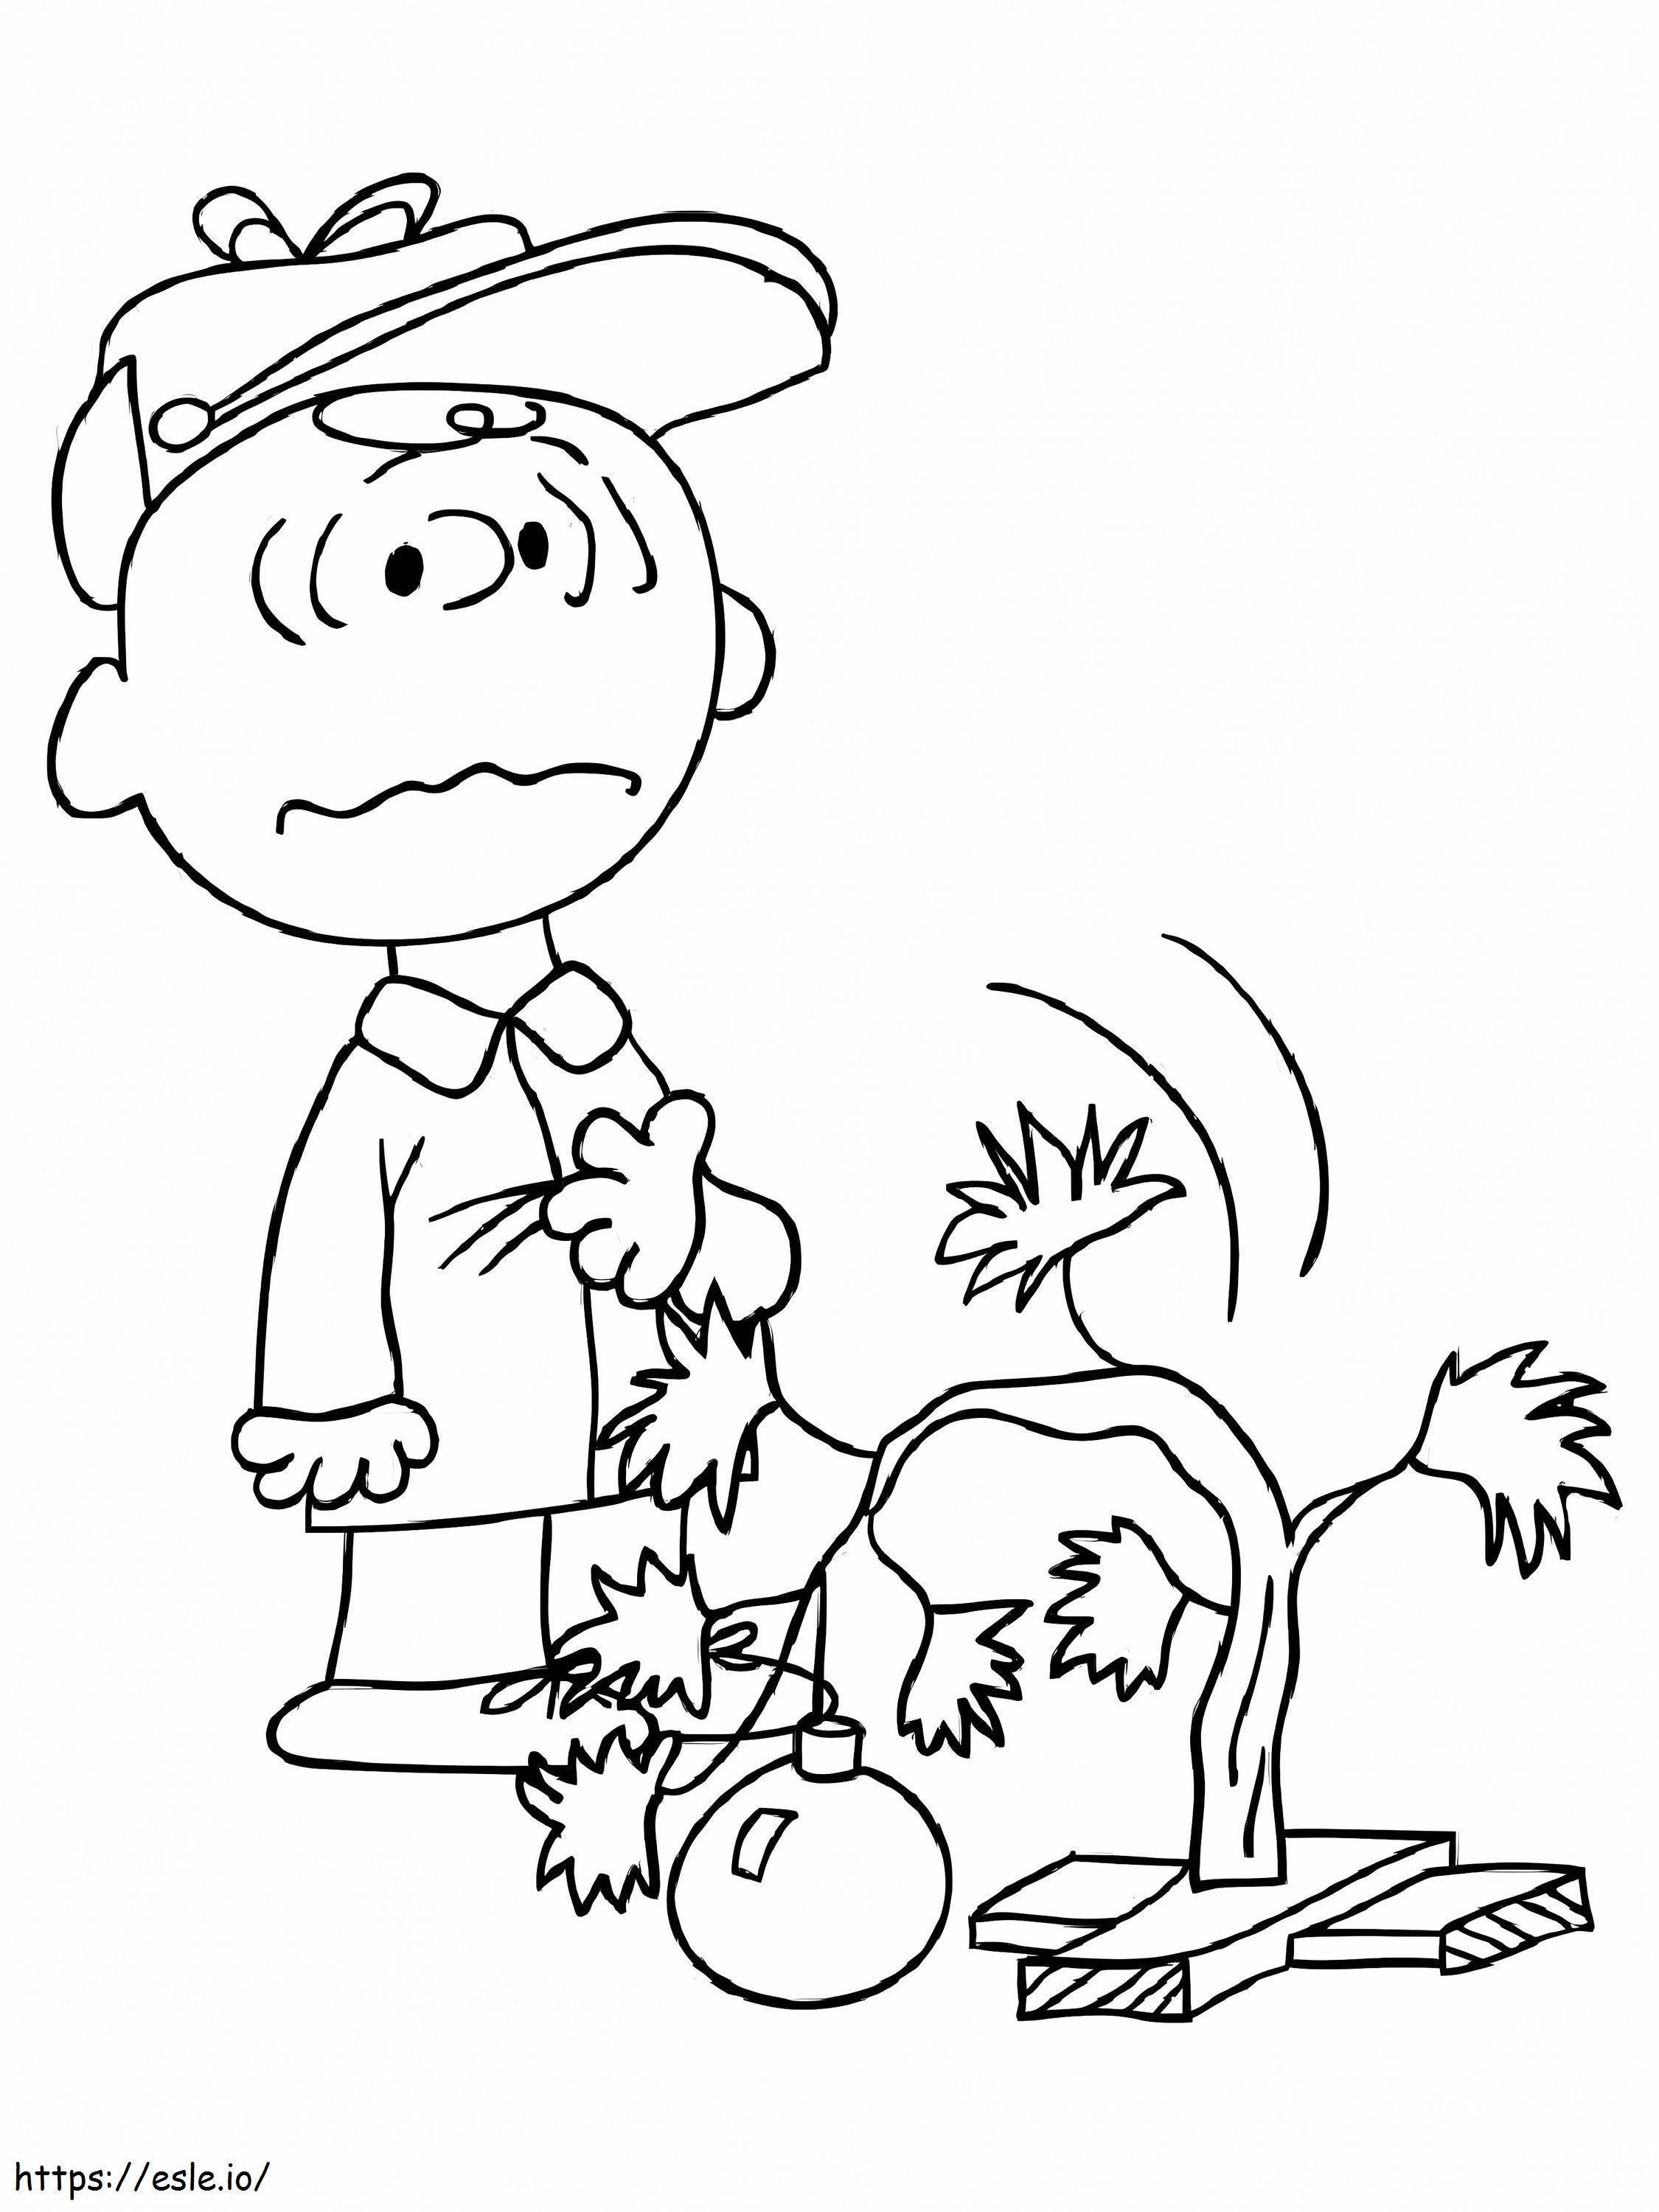 Triste Charlie Brown coloring page